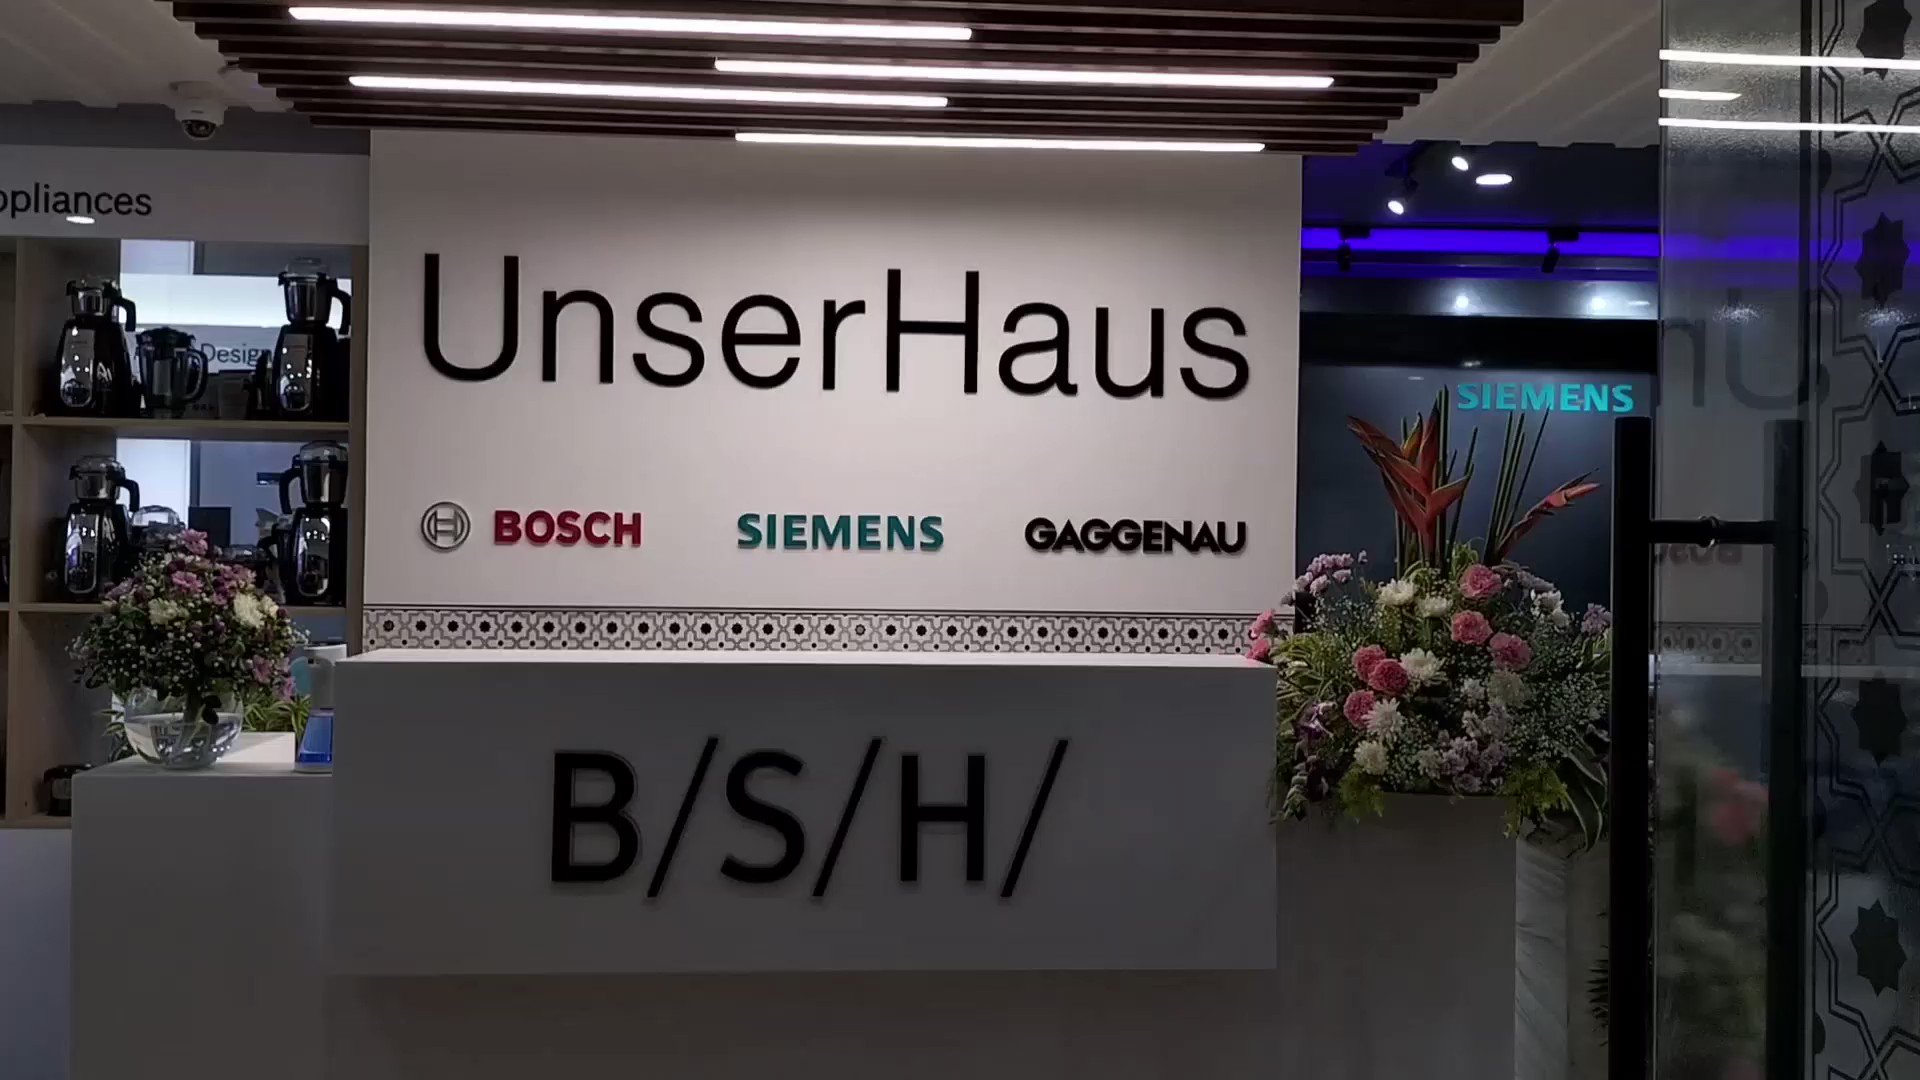 BSH India on X: "Enliven your spaces with the perfect combination of  technology and comfort. Explore the extraordinary with Bosch, Siemens and  Gaggenau under one roof at the UnserHaus experience centre. #BoschHomeIndia  #